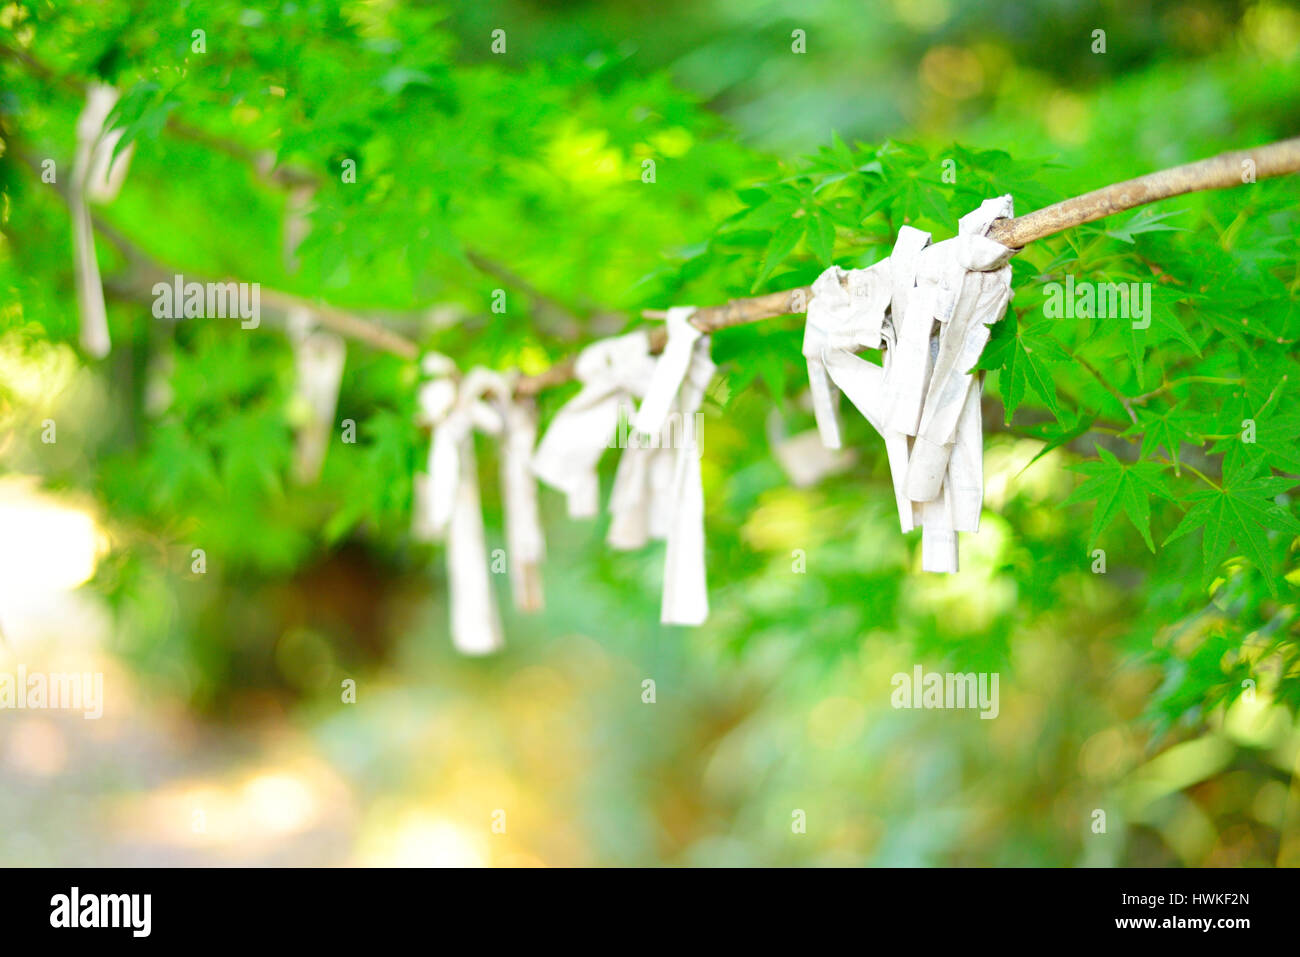 Omikuji, Japanese fortune, tied to a tree branch. Close-up and selective focus. Stock Photo